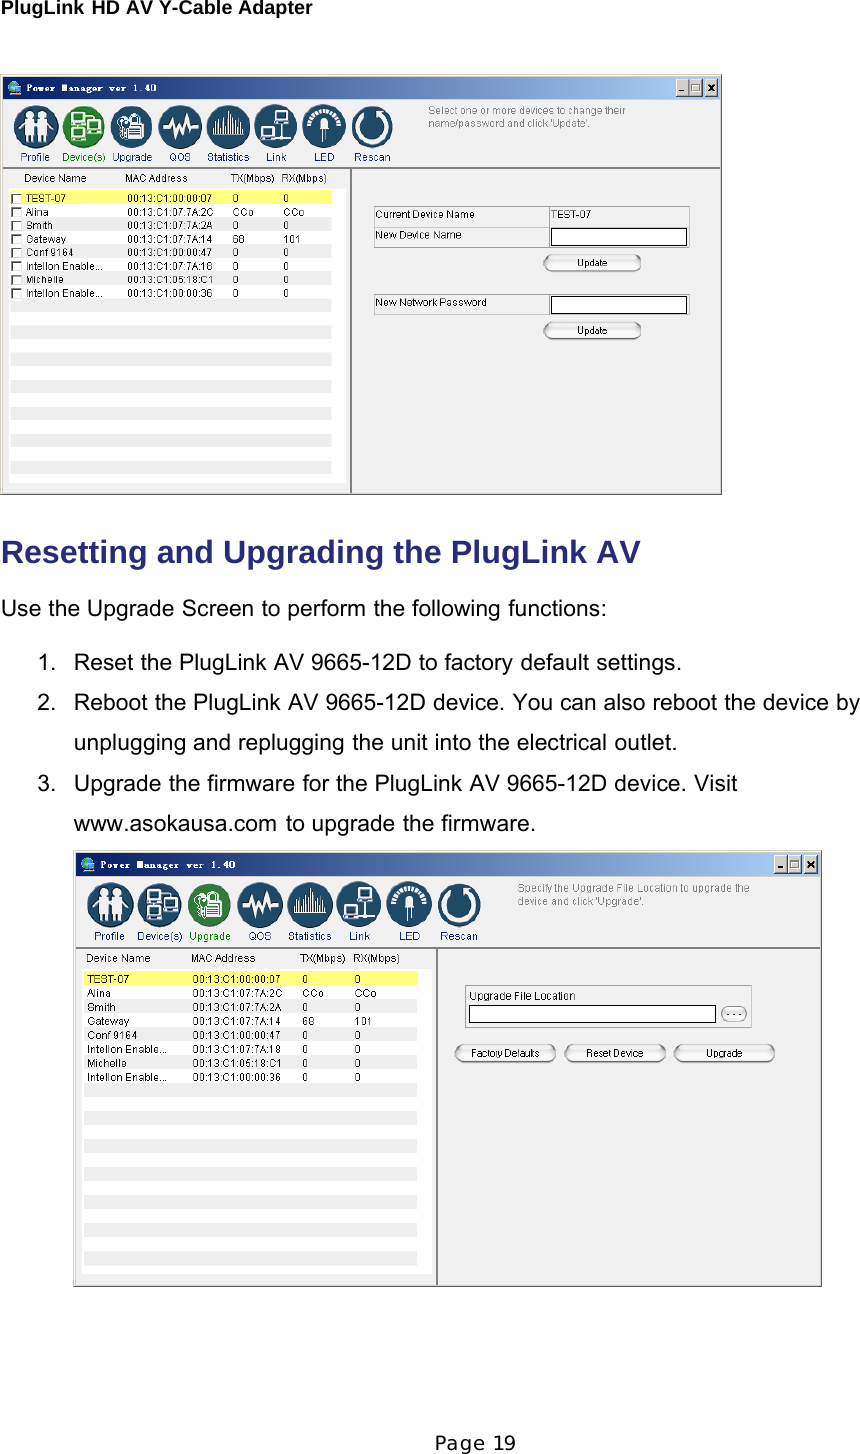 PlugLink HD AV Y-Cable Adapter Page 19         Resetting and Upgrading the PlugLink AV  Use the Upgrade Screen to perform the following functions:  1.   Reset the PlugLink AV 9665-12D to factory default settings.  2.   Reboot the PlugLink AV 9665-12D device. You can also reboot the device by unplugging and replugging the unit into the electrical outlet. 3.   Upgrade the firmware for the PlugLink AV 9665-12D device. Visit   www.asokausa.com to upgrade the firmware.  